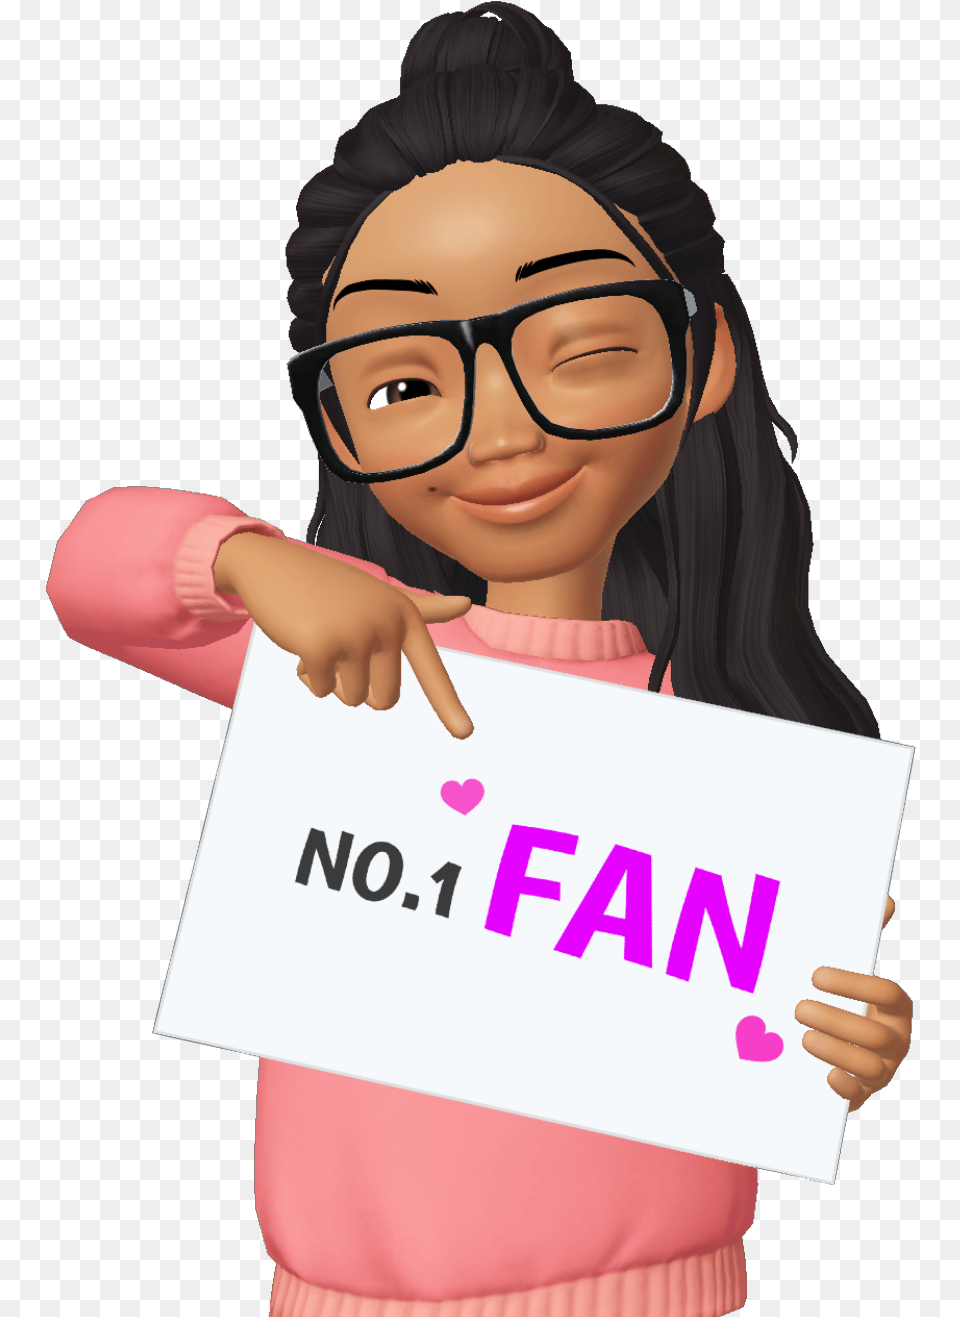 Img Zepeto No 1 Fan, Accessories, Glasses, Finger, Head Png